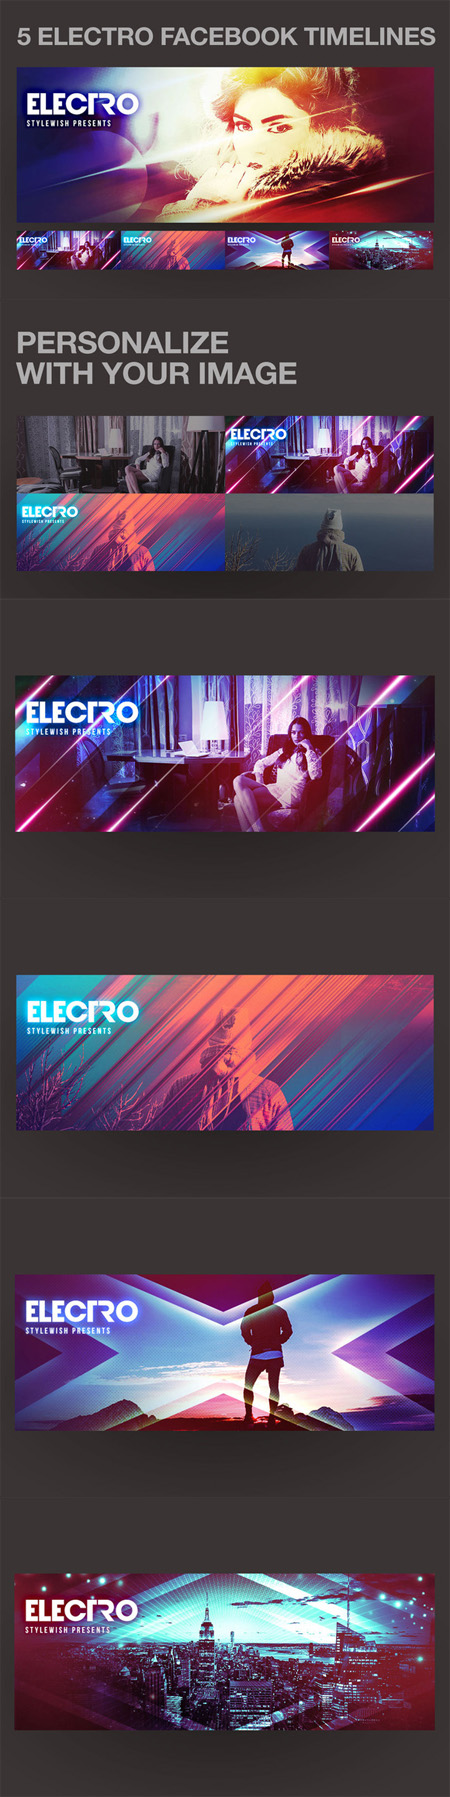 CM - 5 Electro Facebook Timeline Covers 508077